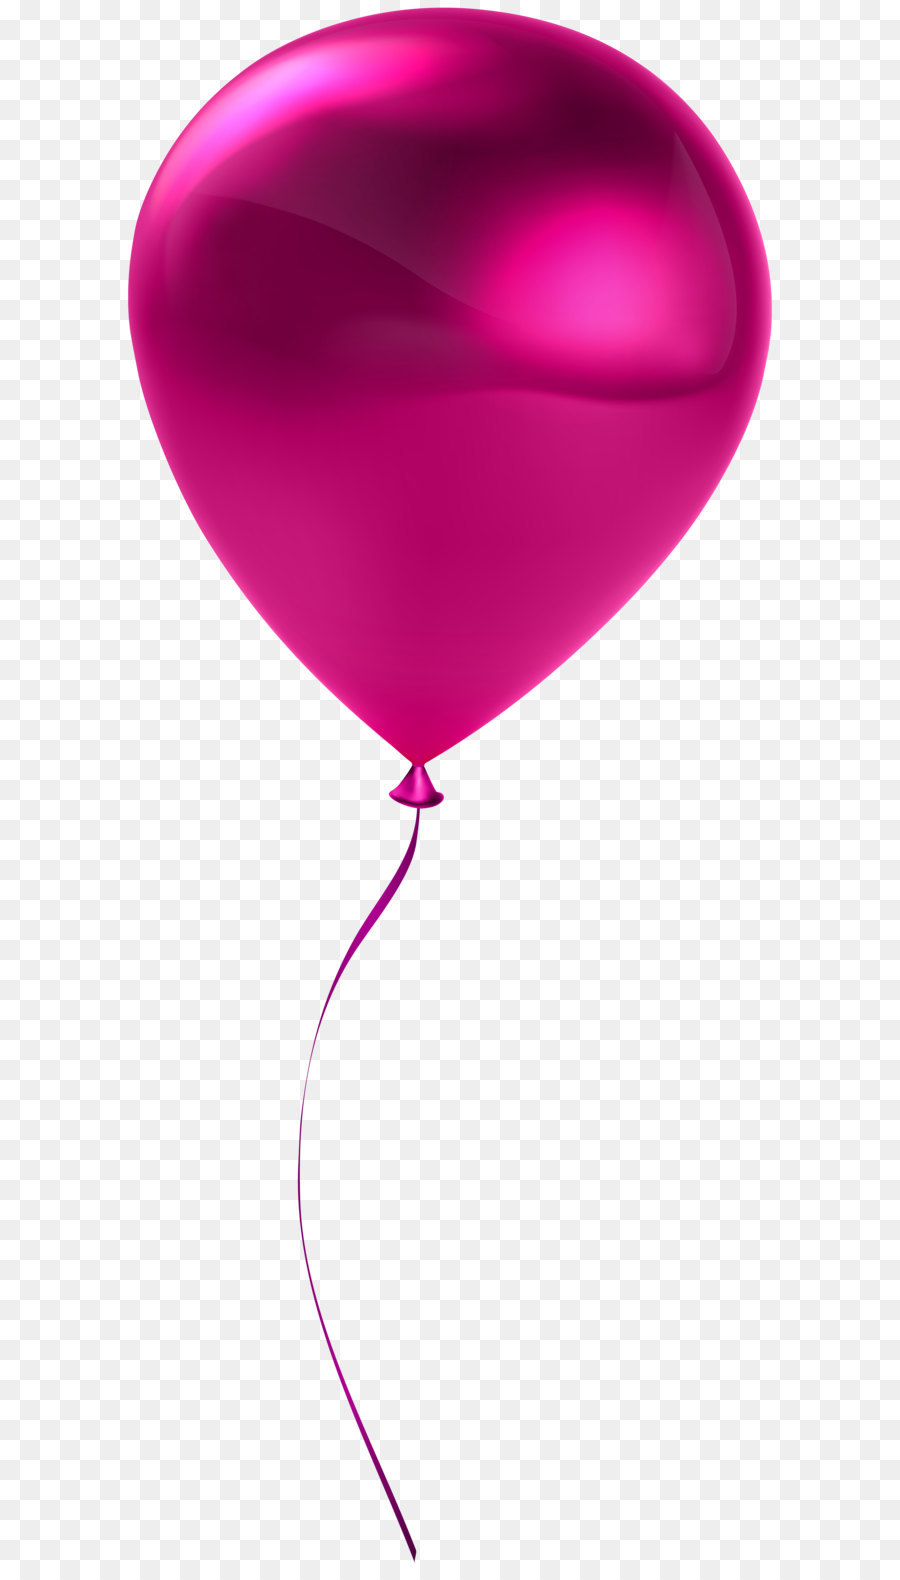 Red Heart Balloon - Single Pink Balloon Transparent Clip Art png download - 3309*8000 - Free Transparent Pink png Download.